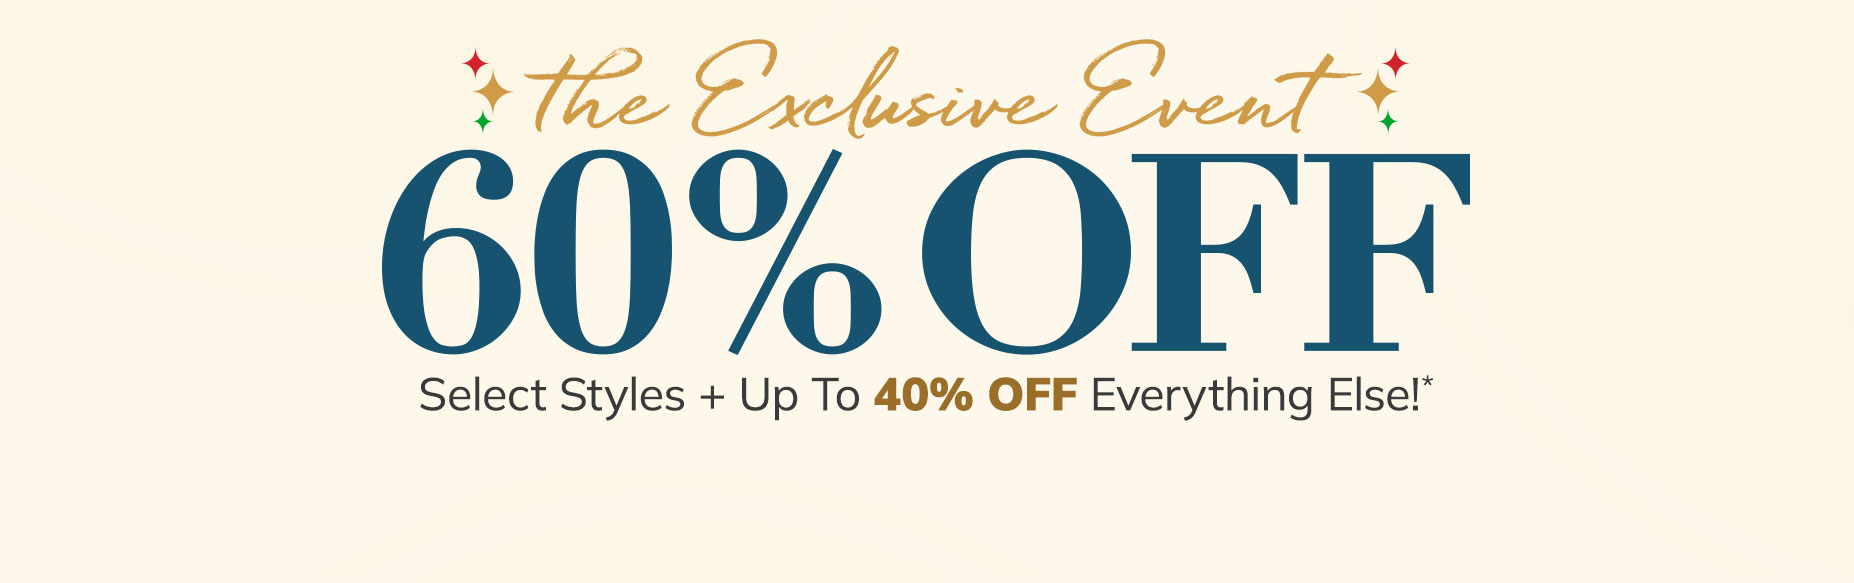 the exclusive event 60% off select styles + up to 40% off everything else